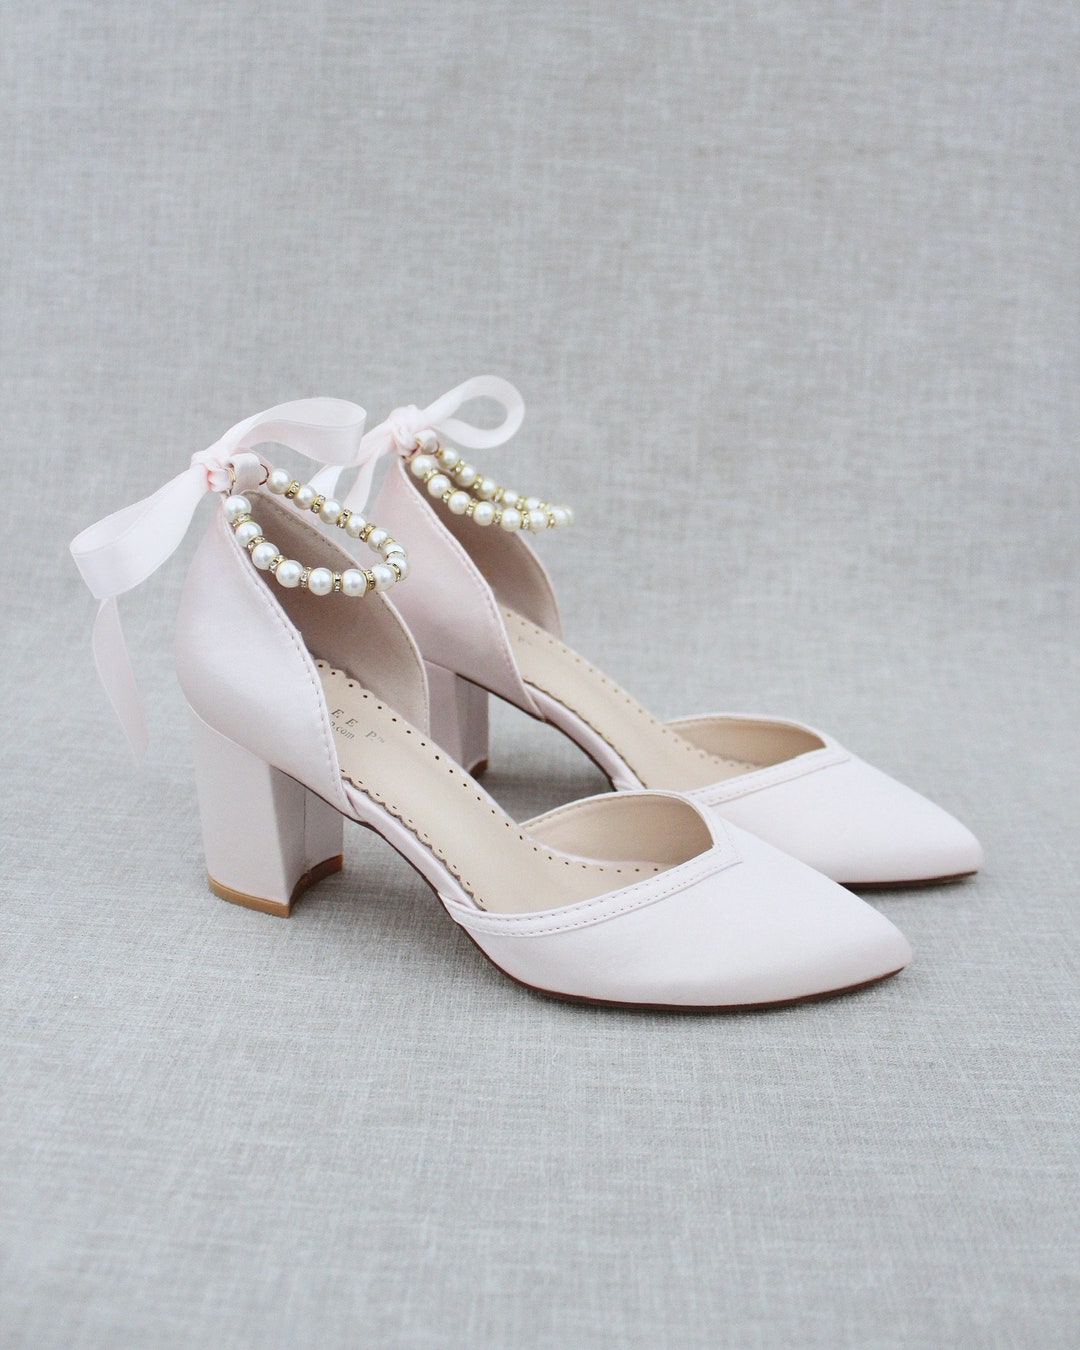 Satin Almond Toe Block Heel With Pearl Ankle Strap Women - Etsy